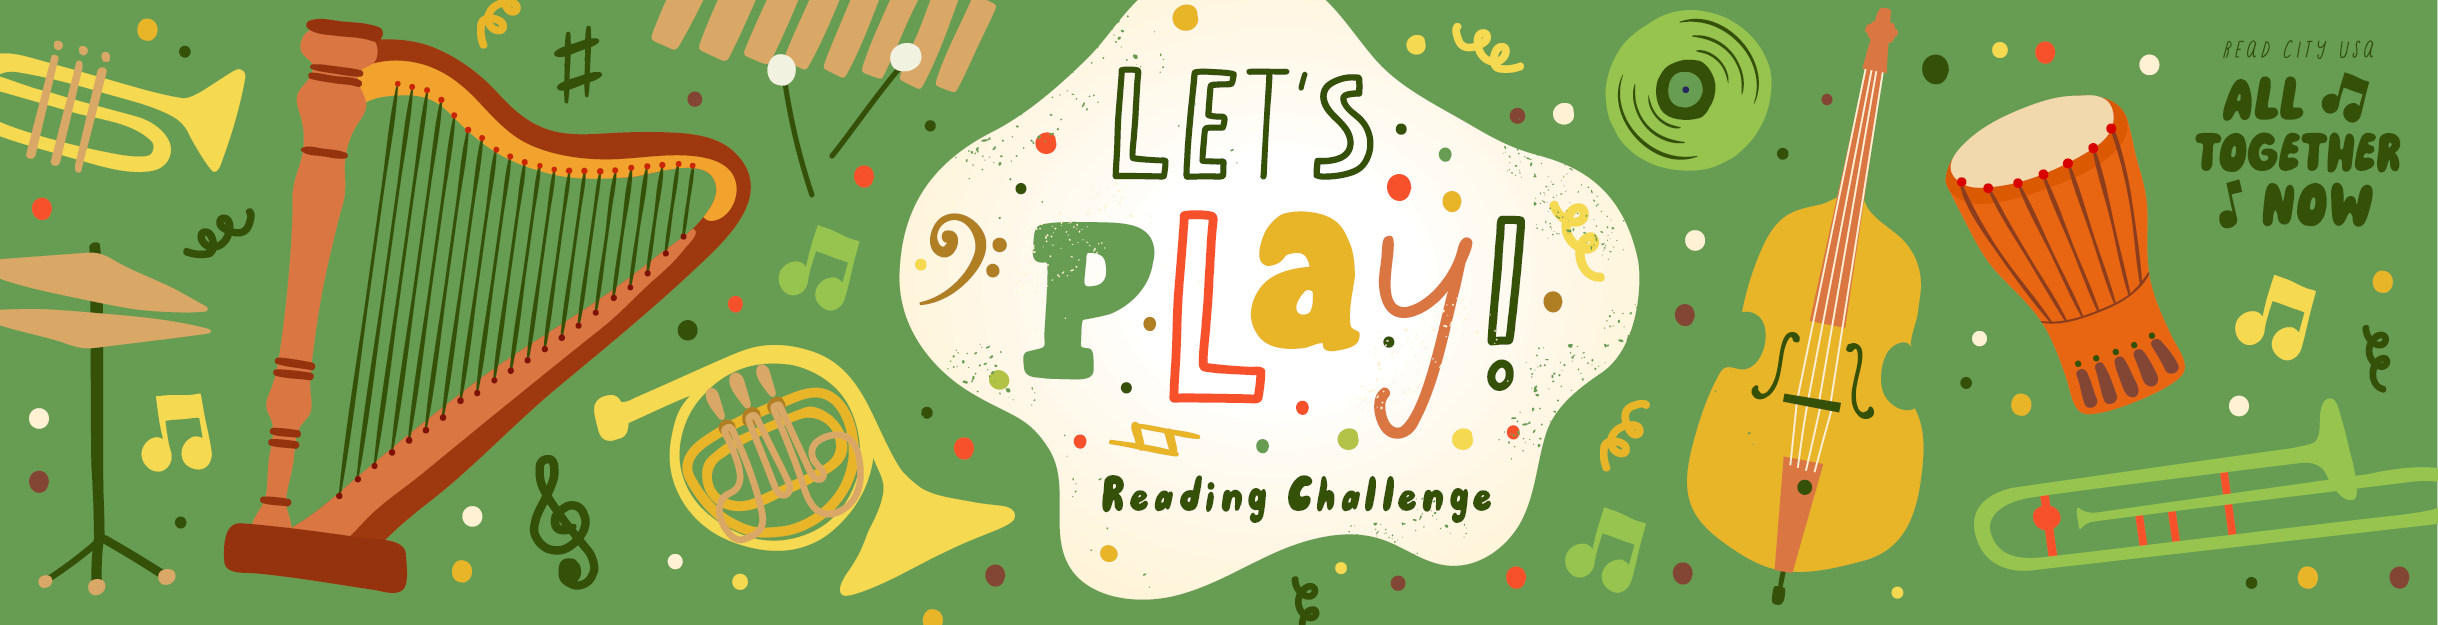 Let's Play! Reading Challenge with colorful graphics of orchestral instruments